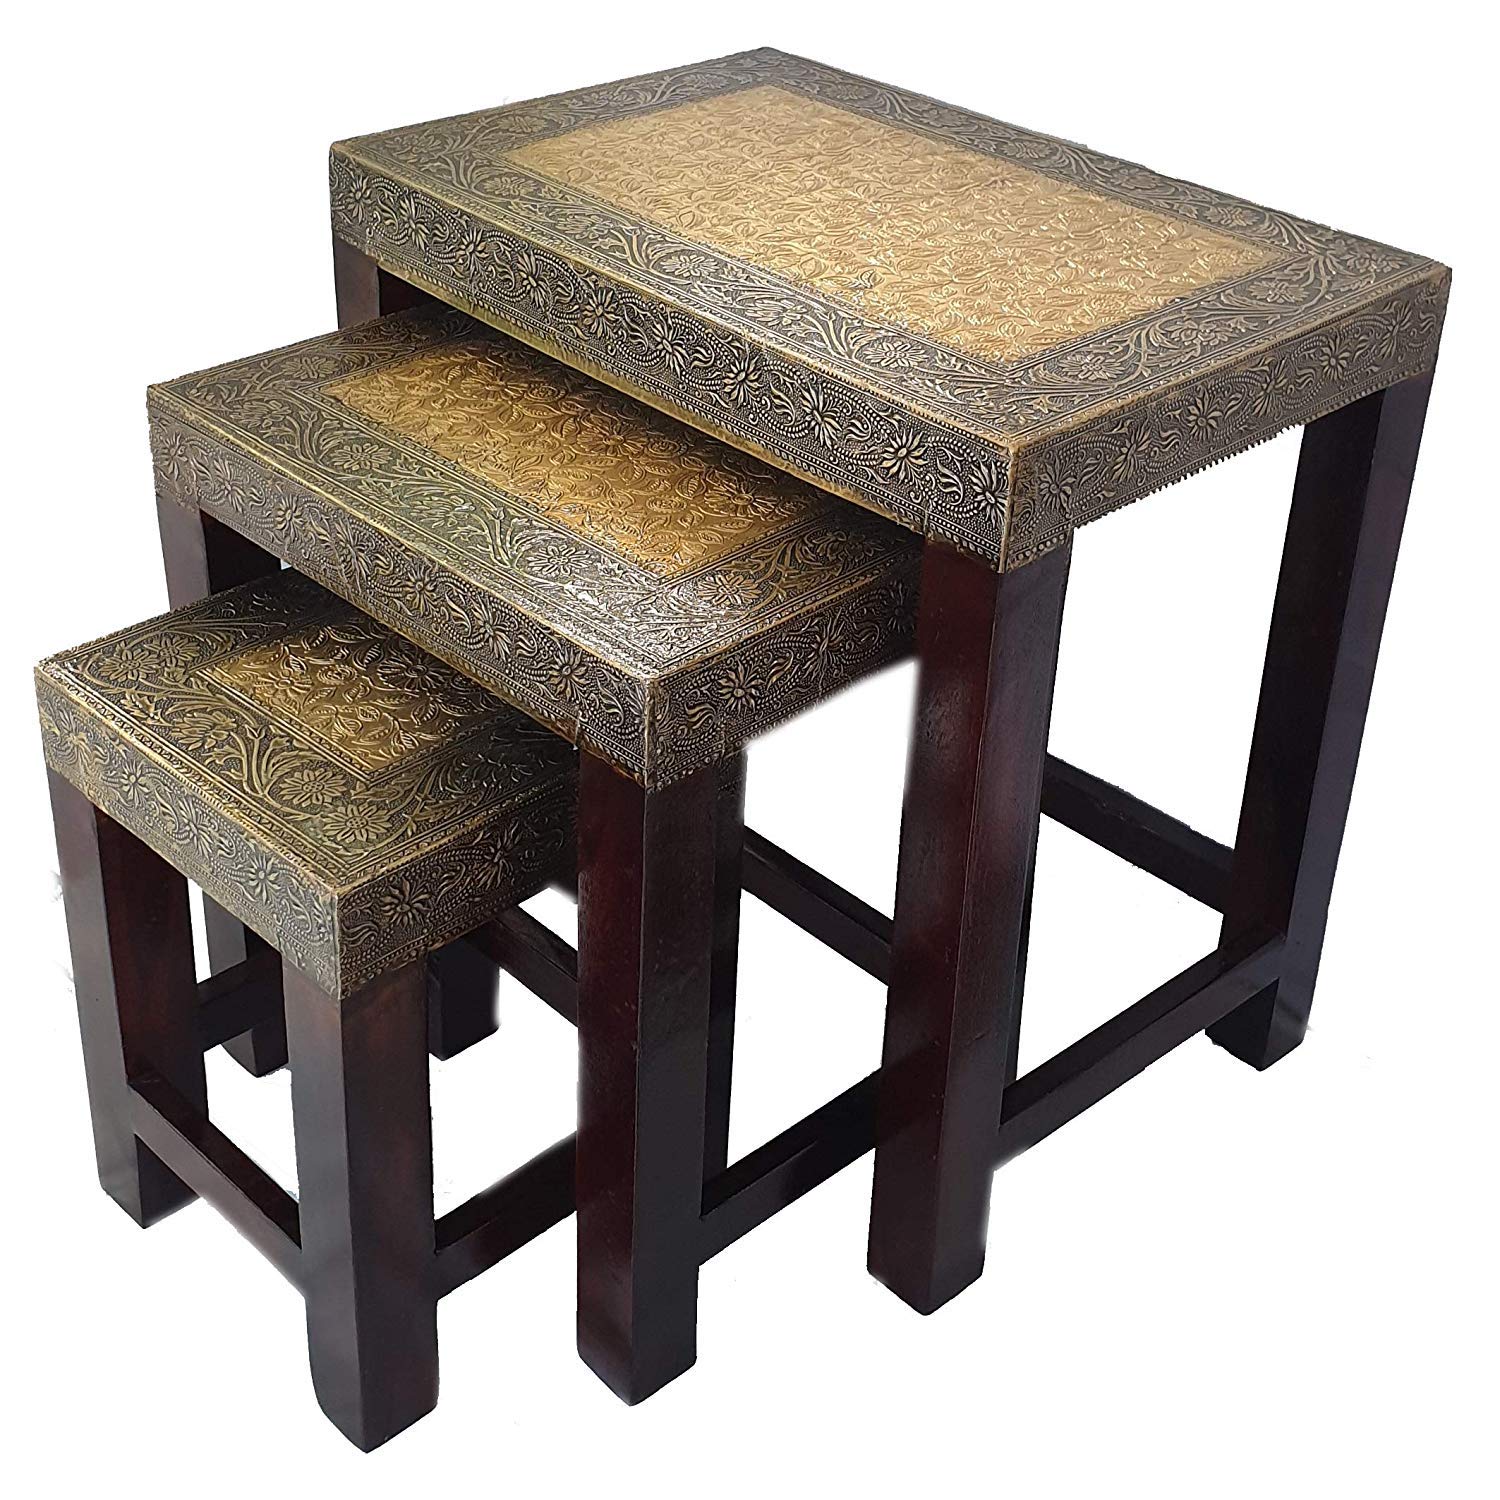 Creative Handicrafts Wood Nesting Stools for Living Room,Brass & Wooden Tables, Wooden Stools | Stool Set of 3